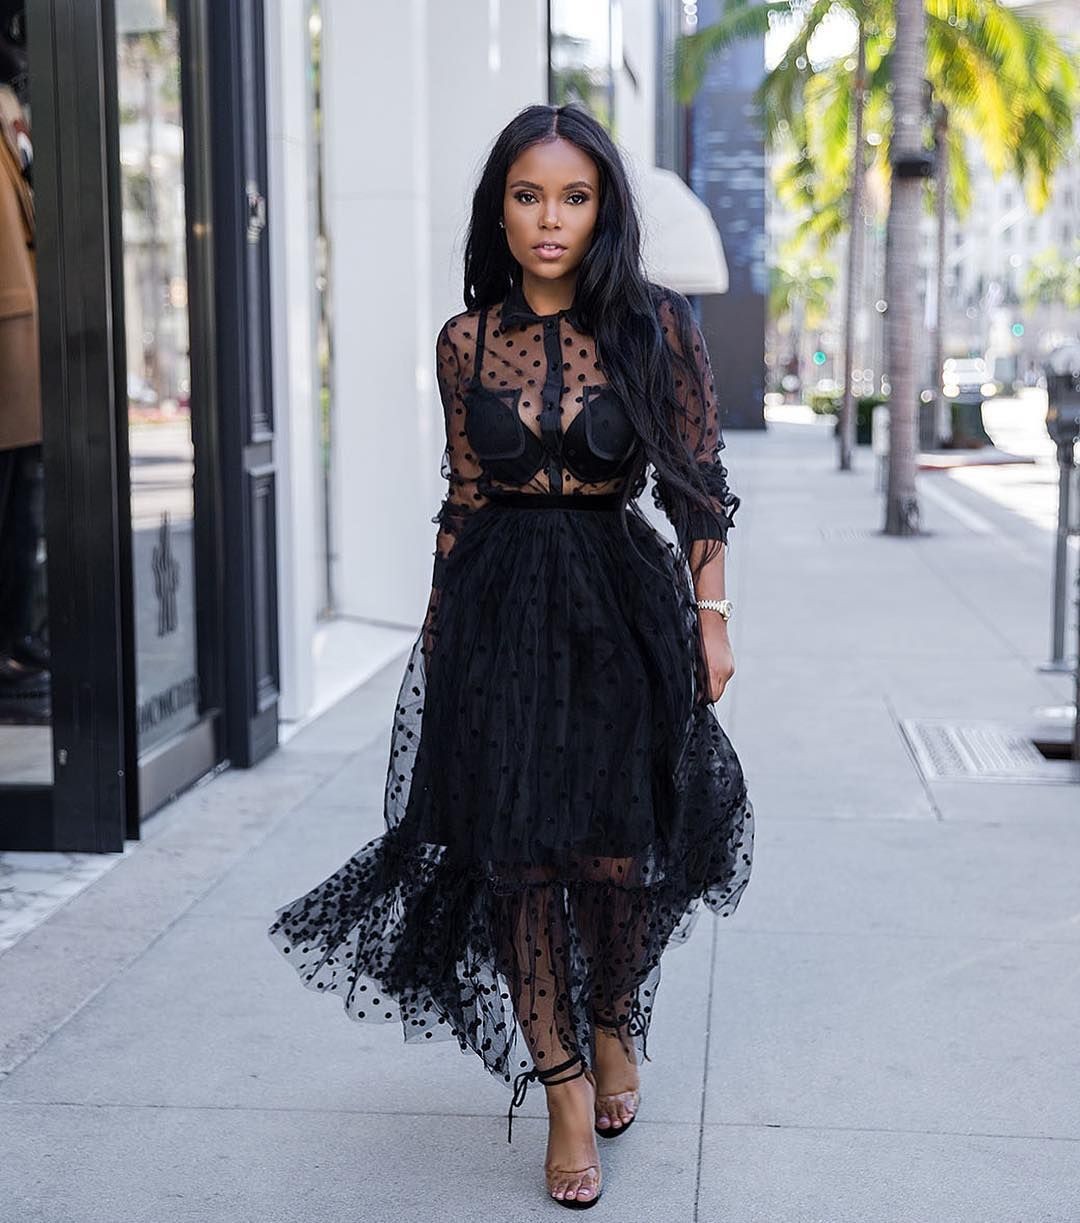 Trend, 10 ways to style a sheer dress